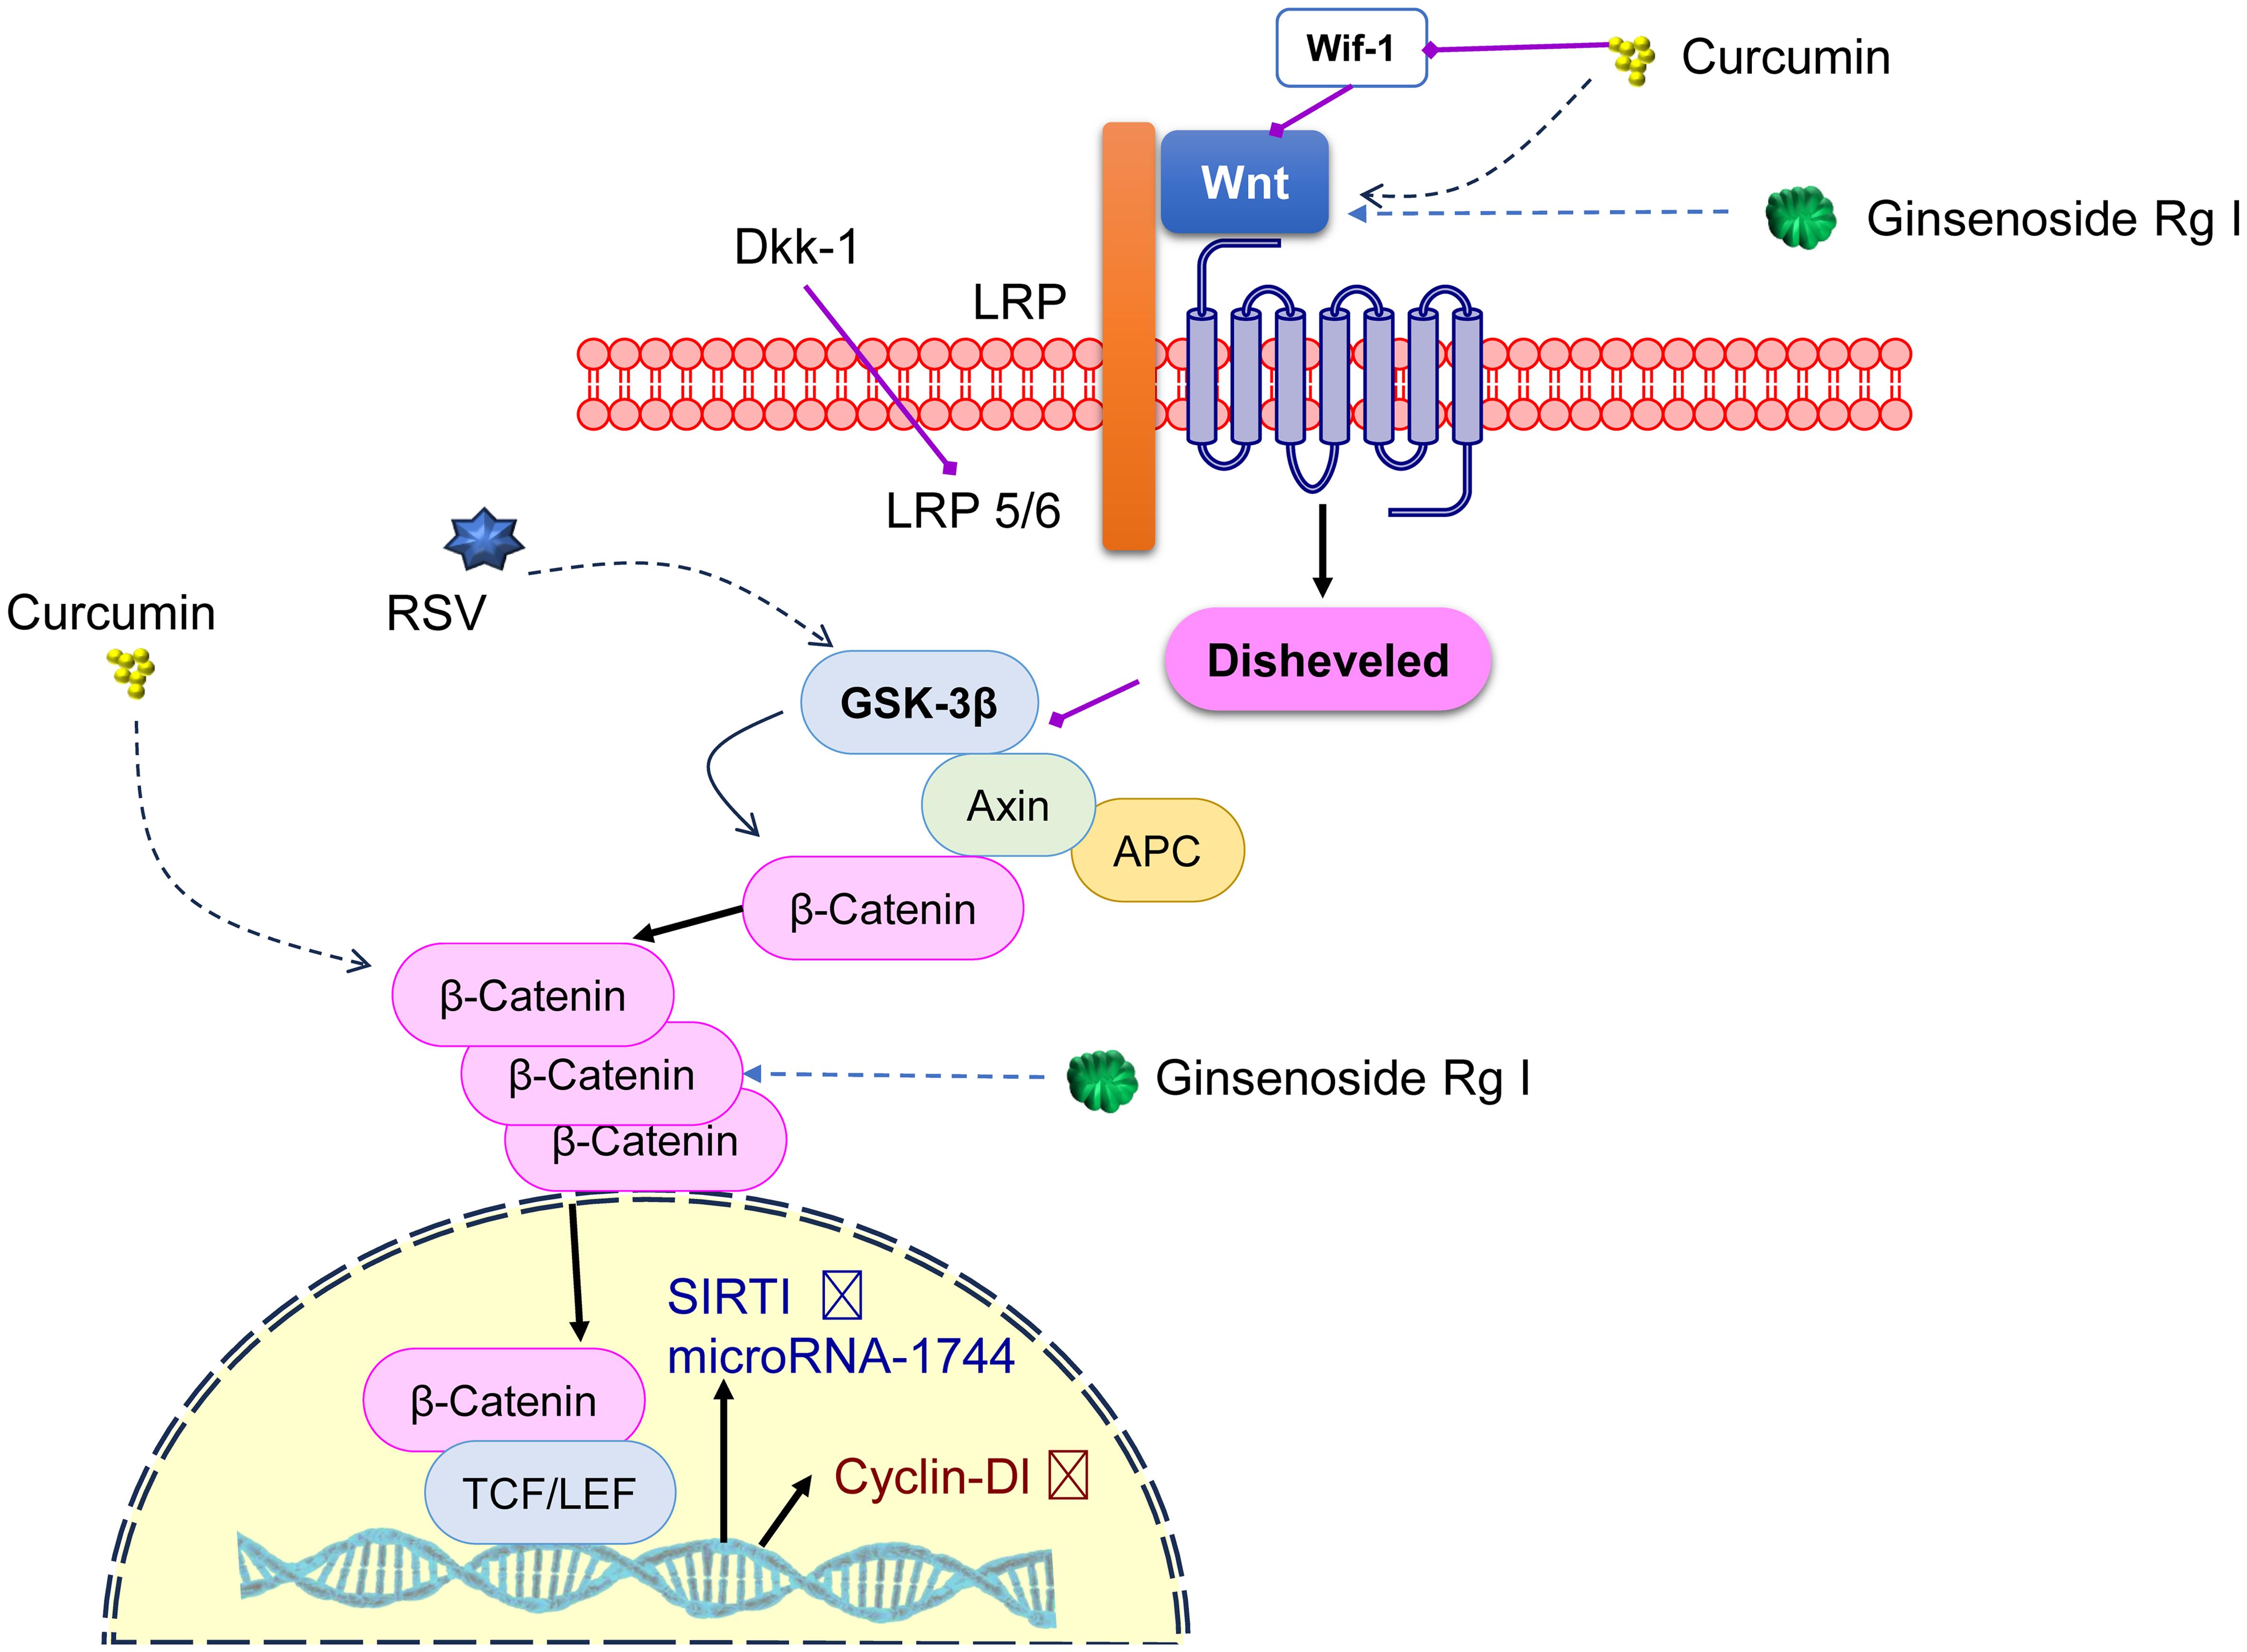 Role of the Wnt pathway in cellular processes and influence of dietary phytoconstituents.